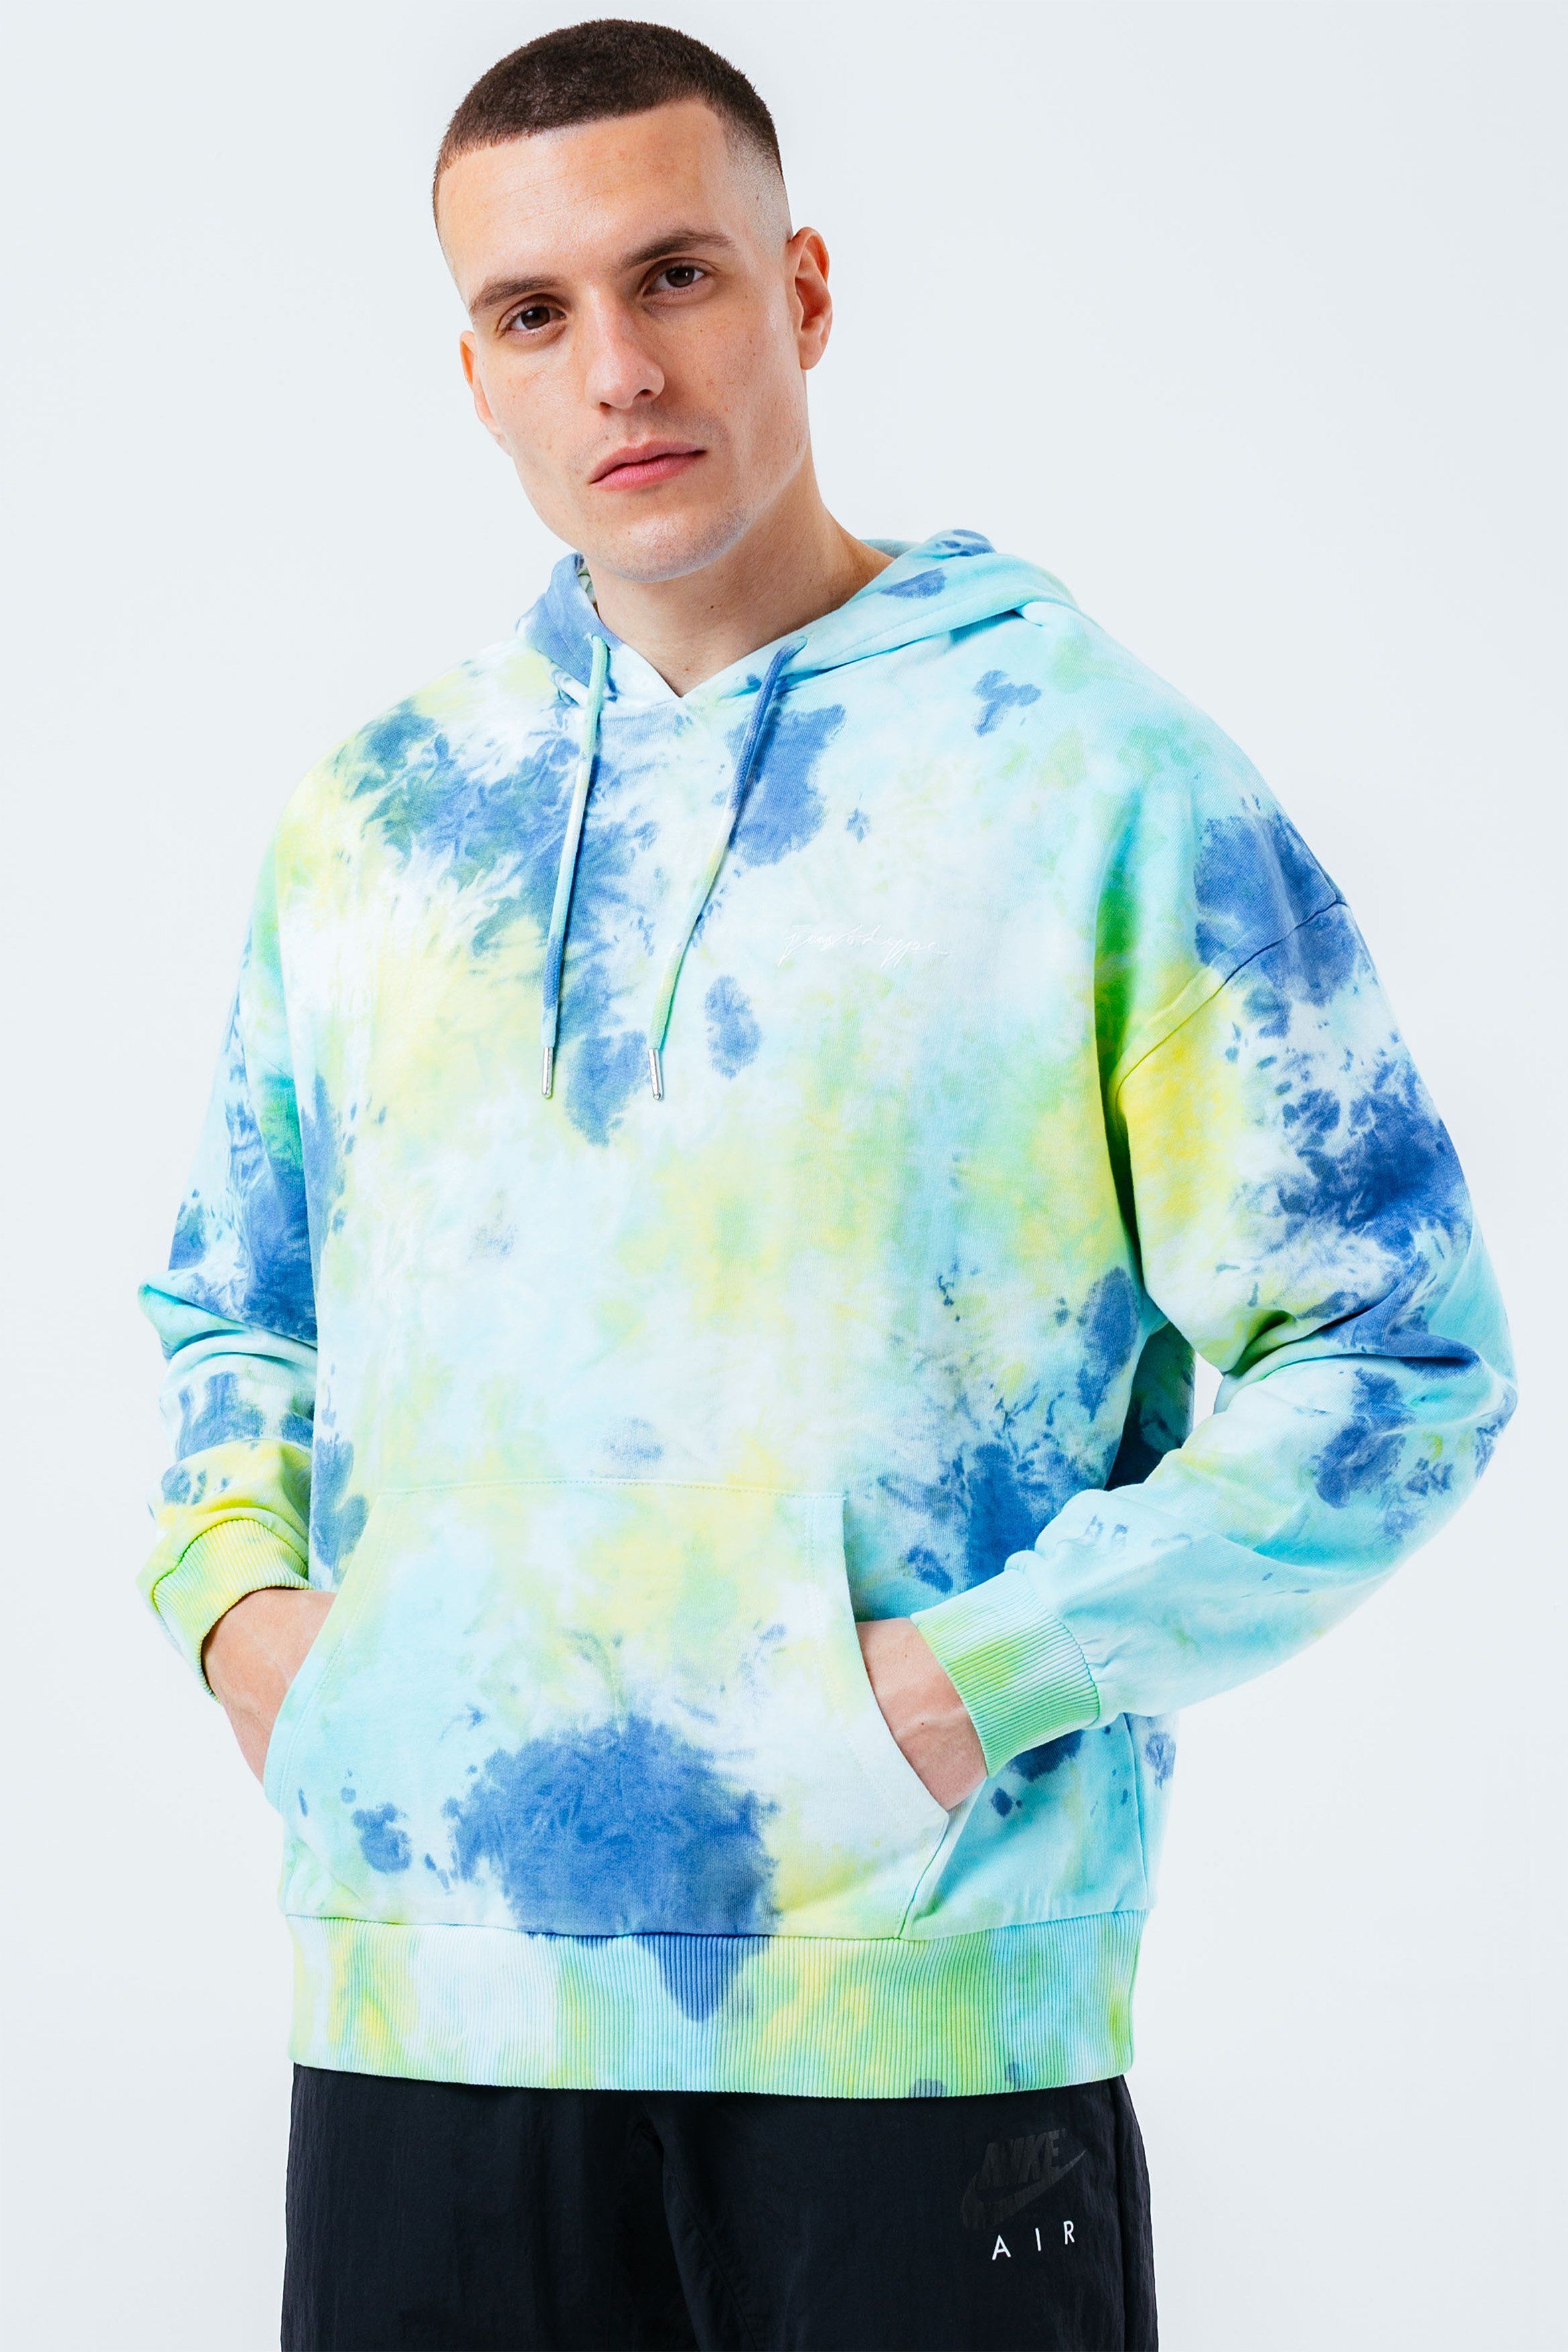 The HYPE. Tropic Dye Men's Oversized Pullover Hoodie is a new go-to everyday essential . Designed in a oversized, on-trend hoodie silhouette, with a fixed hood, kangaroo pocket, elasticated hem and ribbed cuffs for a snug feel. Finished with the signature just hype logo embroidered on the front. Machine wash at 30 degrees.